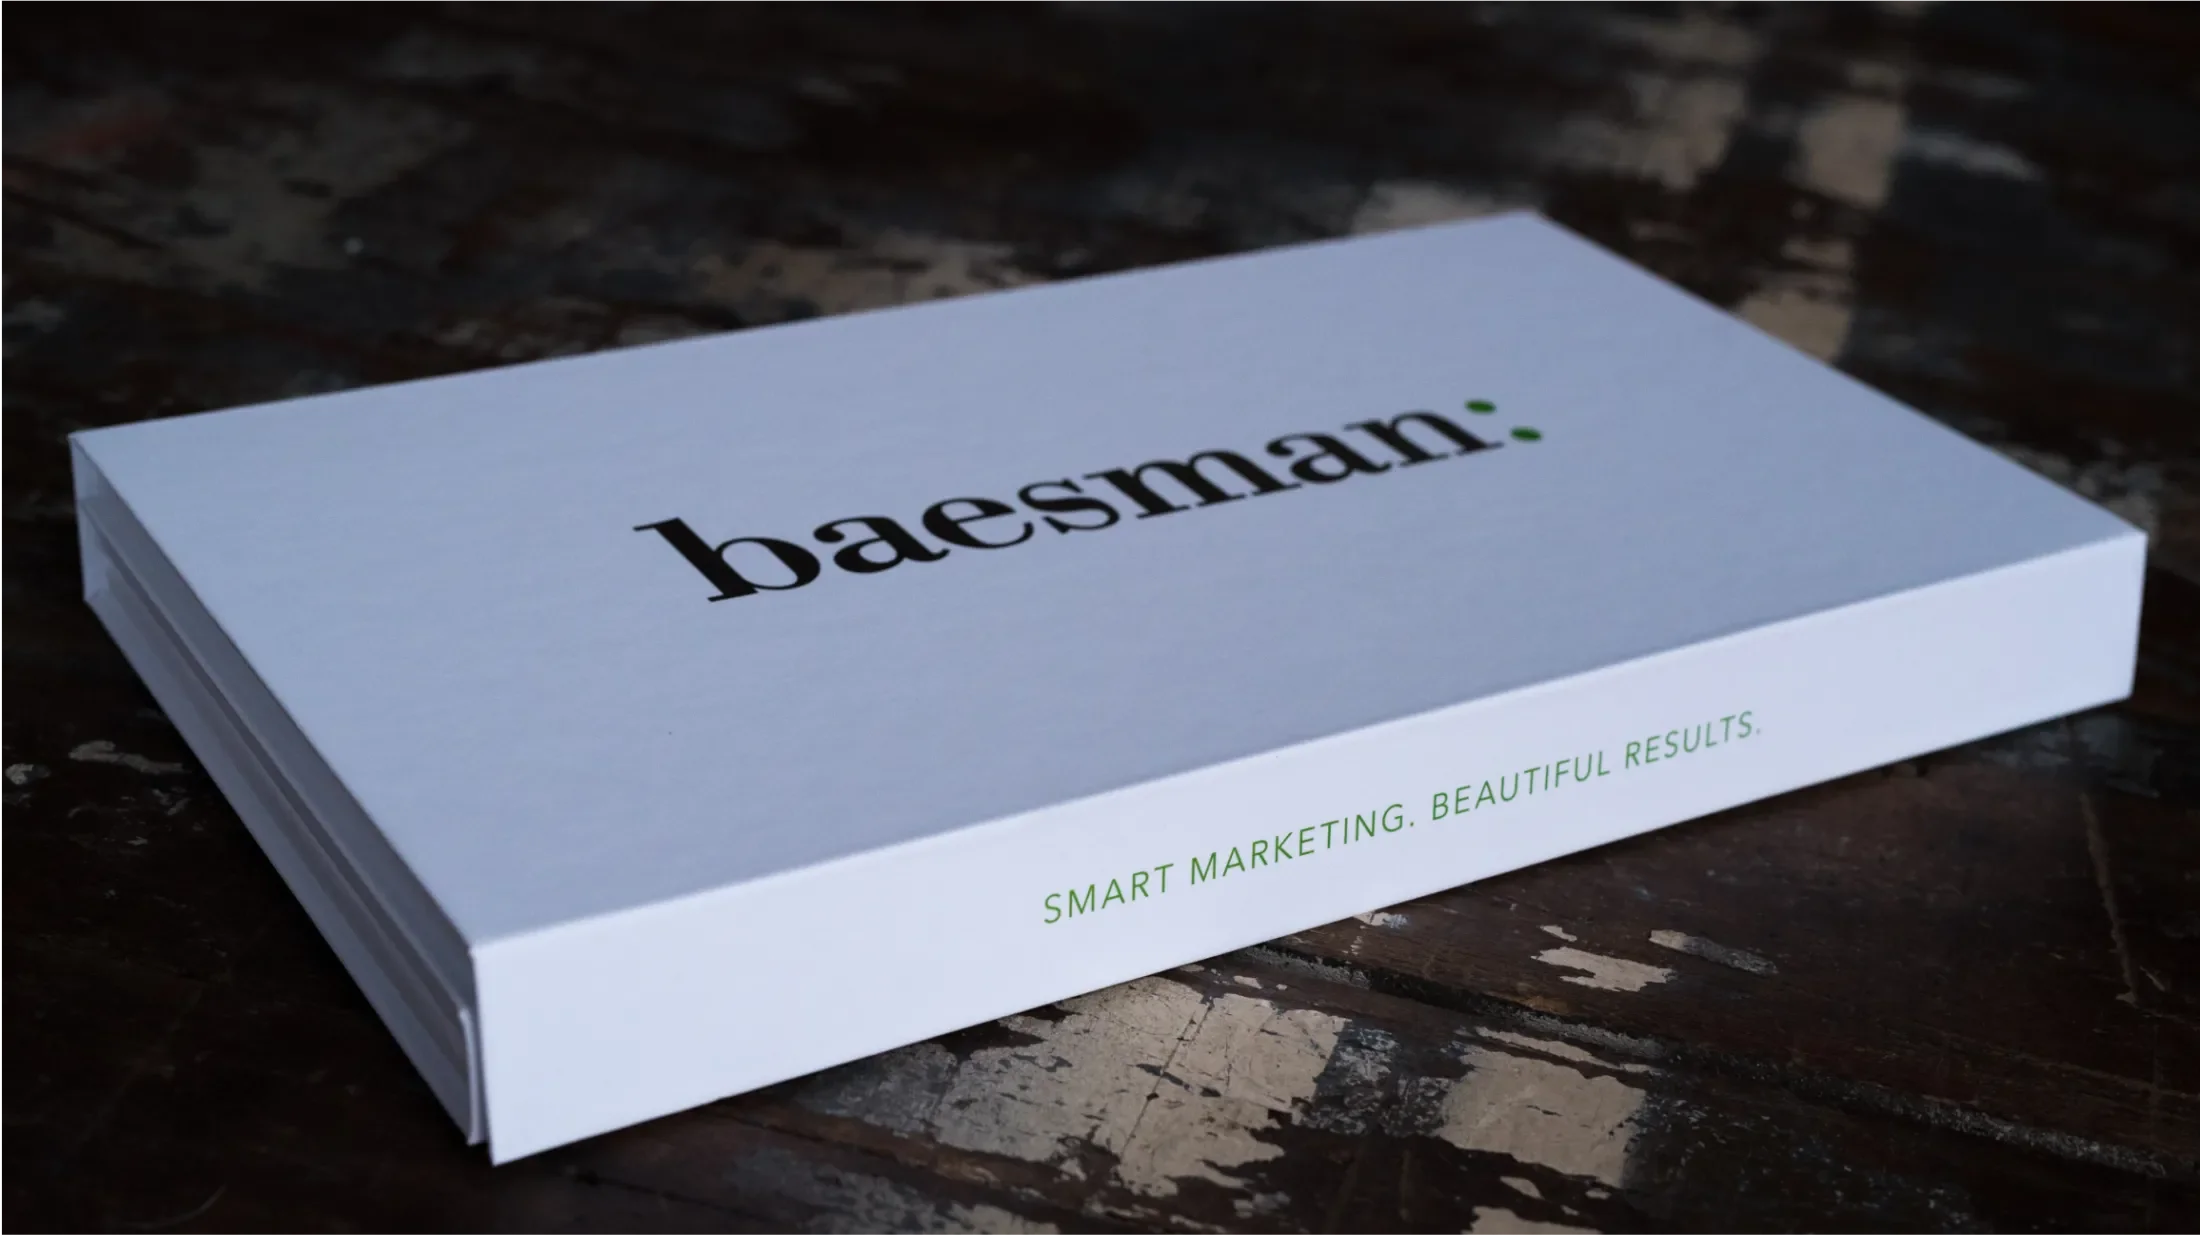 Image of a box holding some print advertising for Baesman